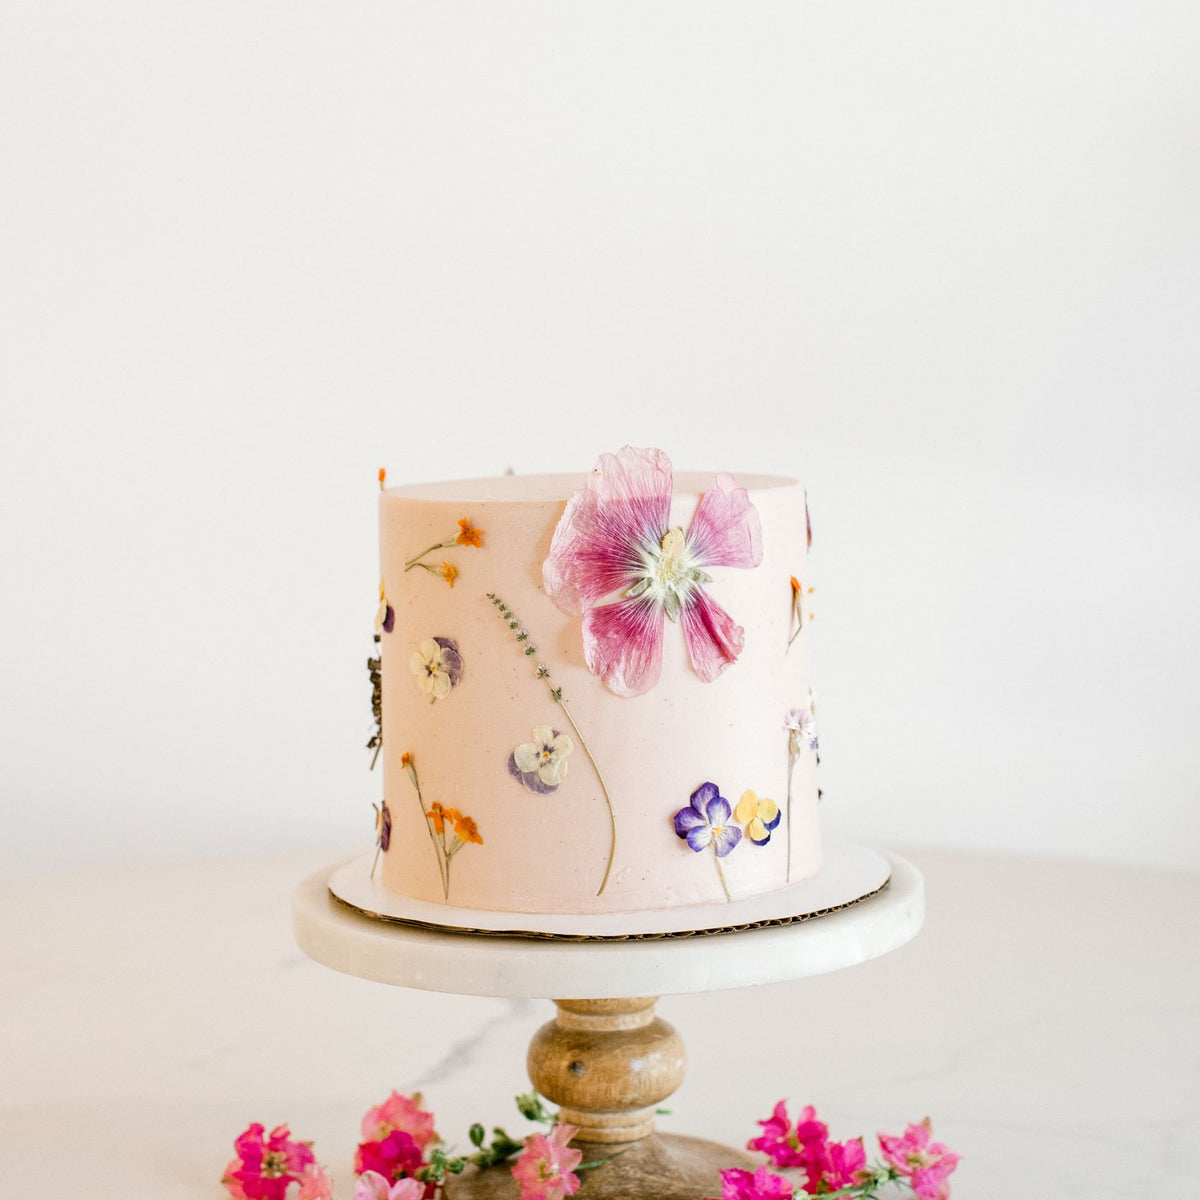 Edible Flowers for Cakes, Baking Tips